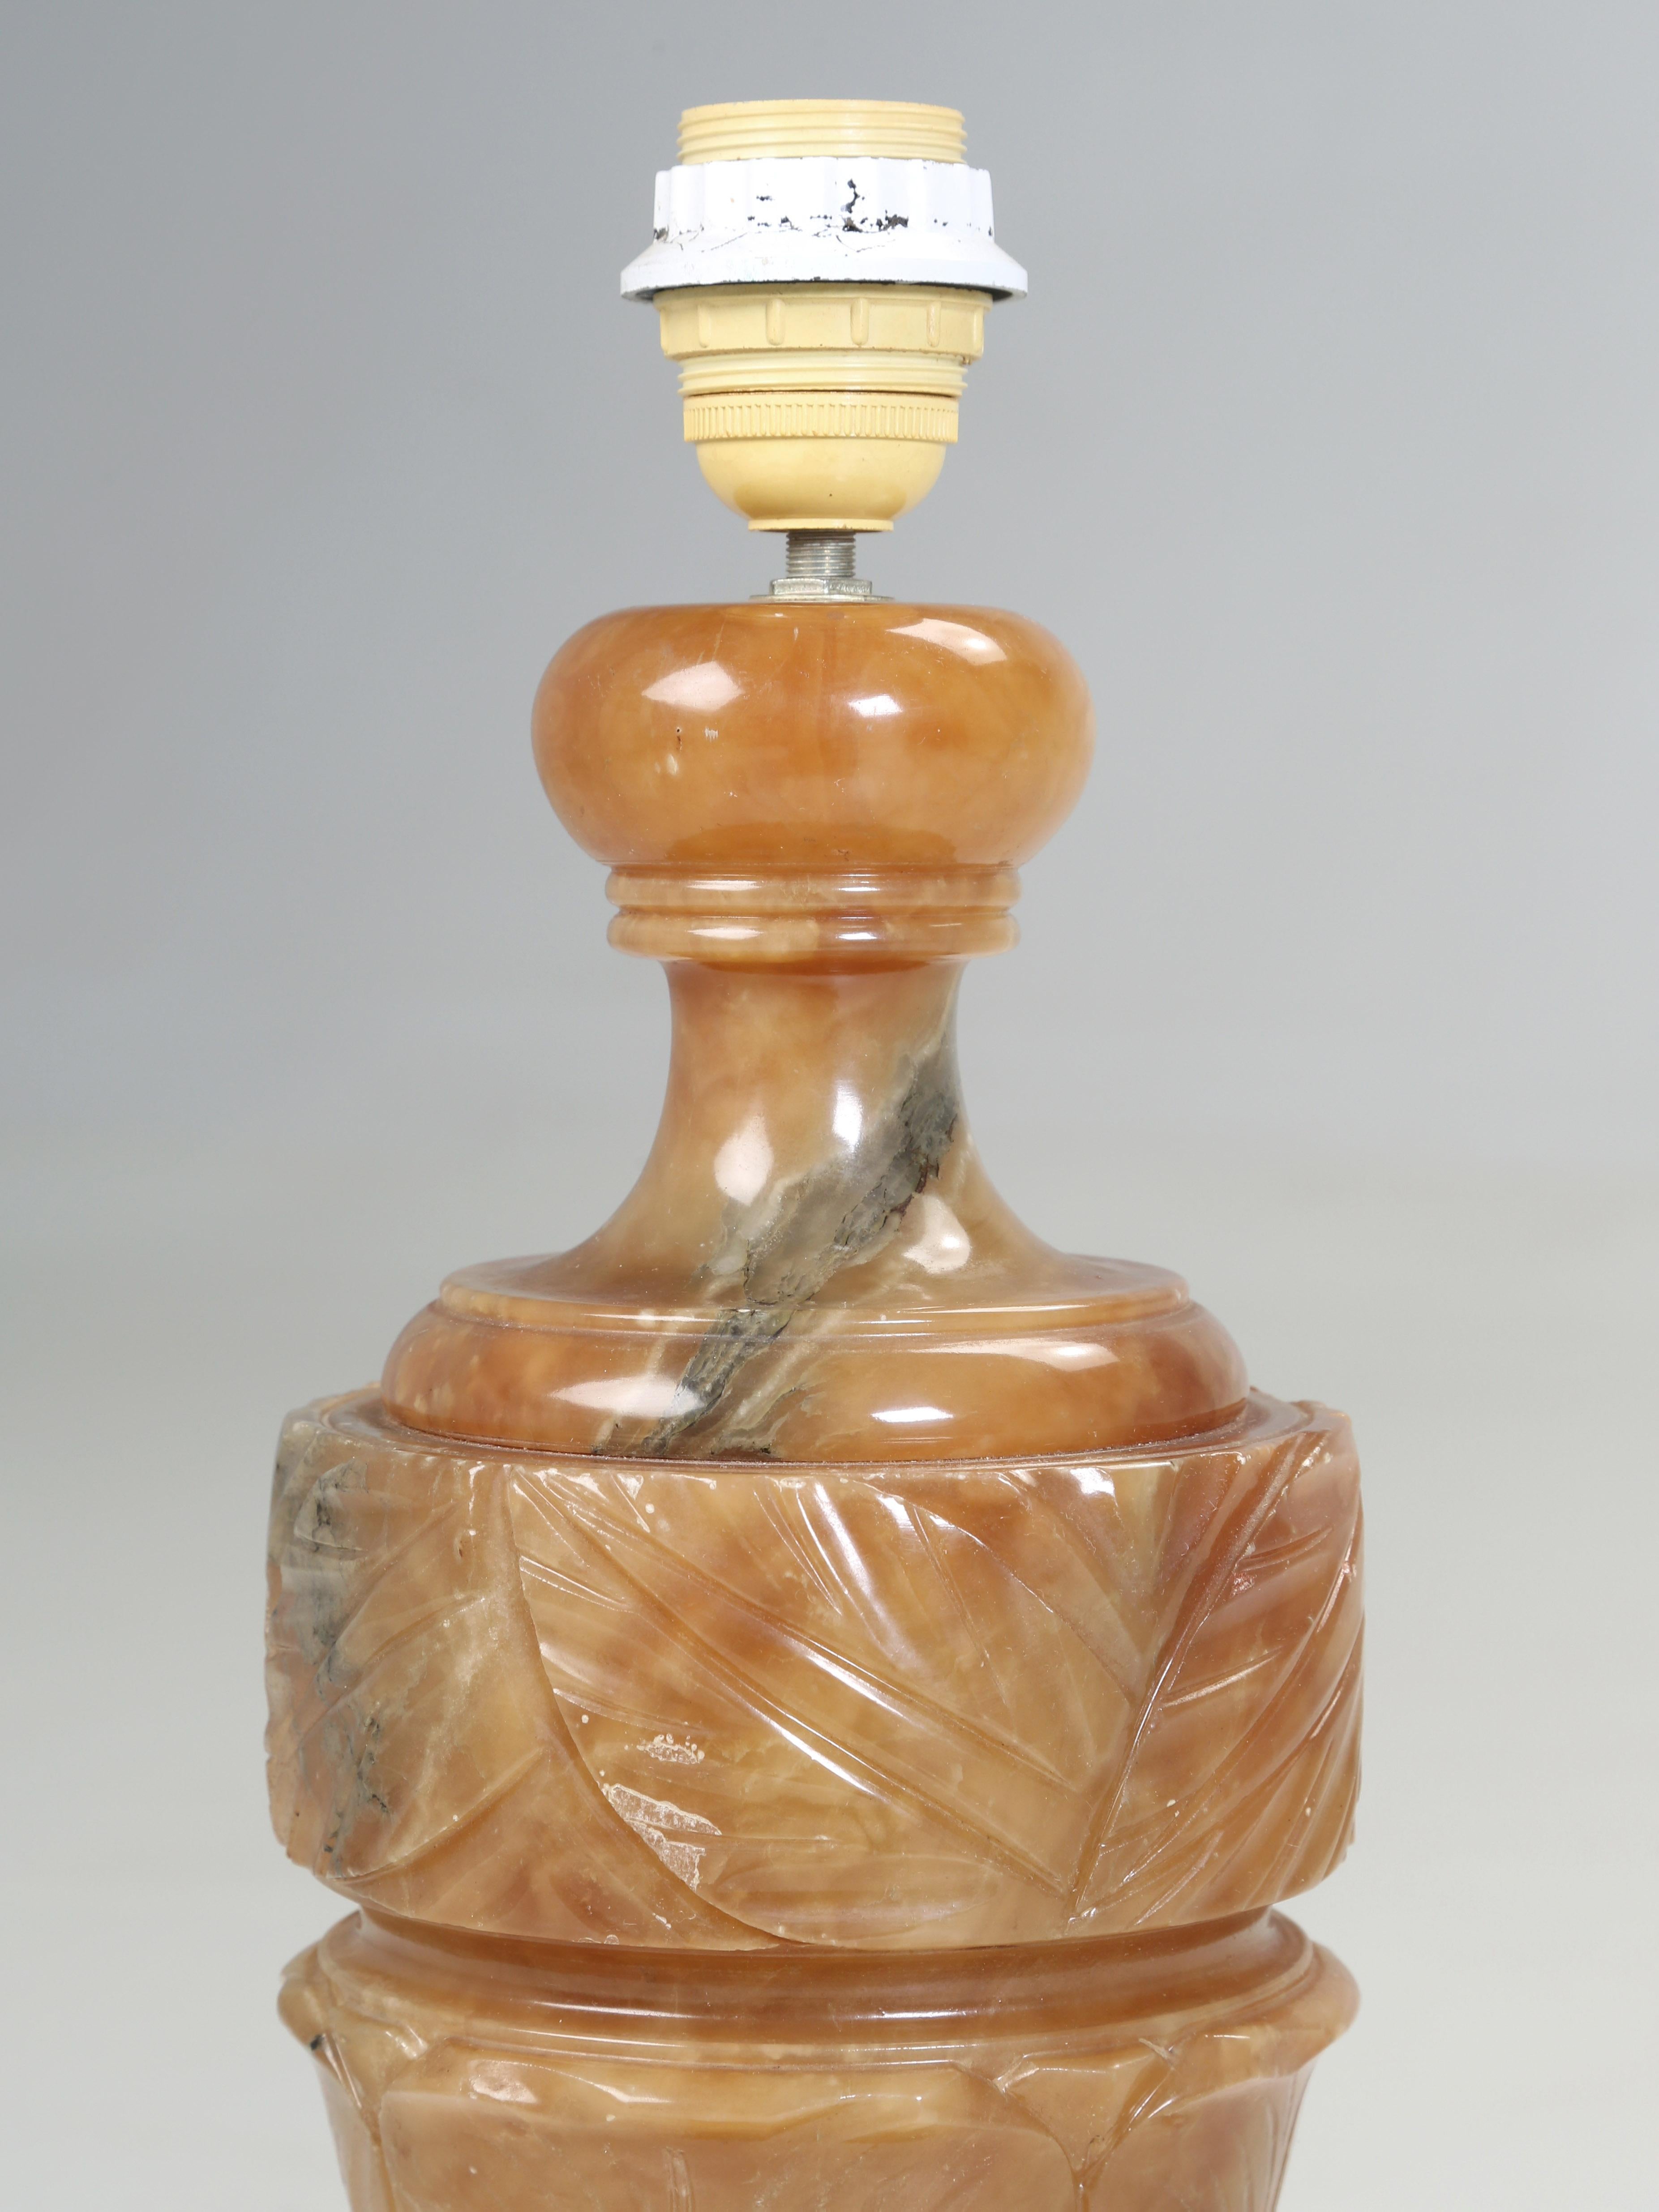 Beautiful Hand-Carved Alabaster Lamp imported from France and does require rewiring for the US.
The stone, Alabaster comes in several colors, although they then to be mostly white, yellow or orange. The mineral is ideal for carving since it is